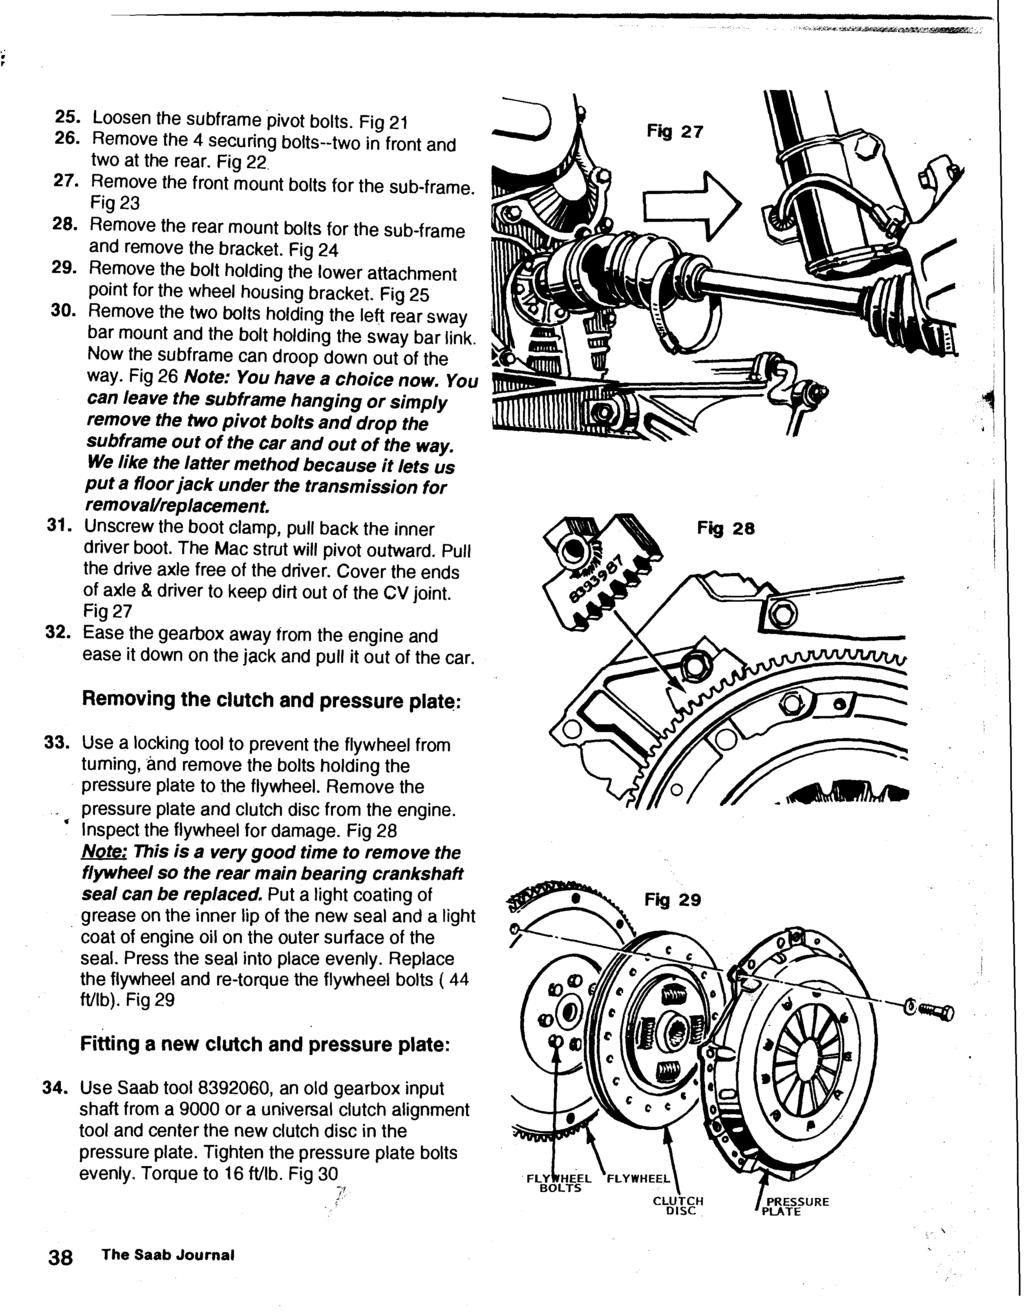 Loosen the subframe pivot bolts. Fig 21 Remove the 4 securing bolts--two in front and two at the rear. Fig 22. Remove the front mount bolts for the sub-frame.